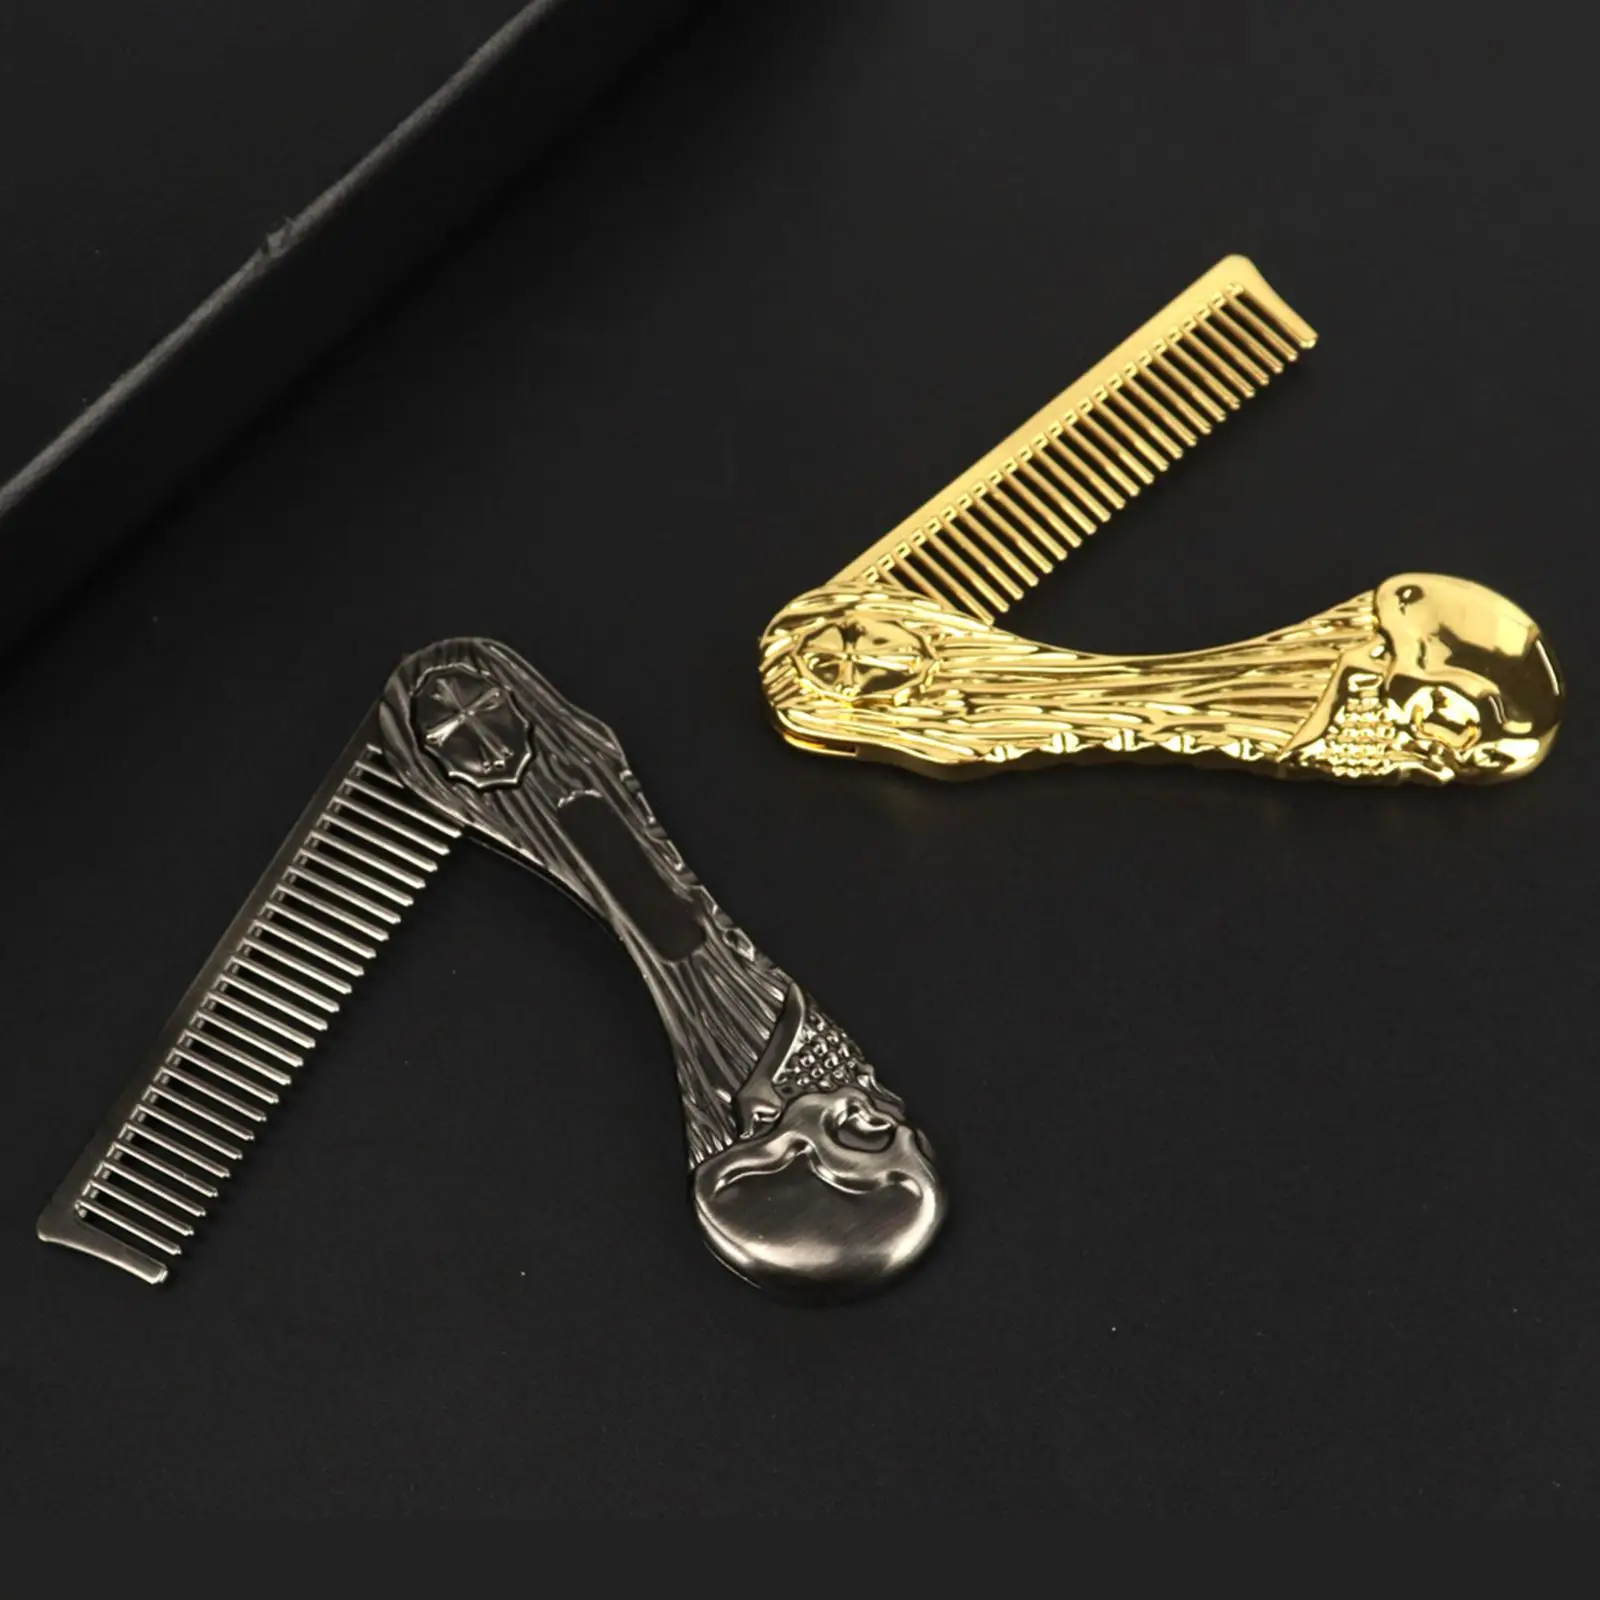 Folding Beard Comb with Skull Design Pocket Sized for Mustache & Hair Gift for Men Portable Mustache Comb for Home Car Travel